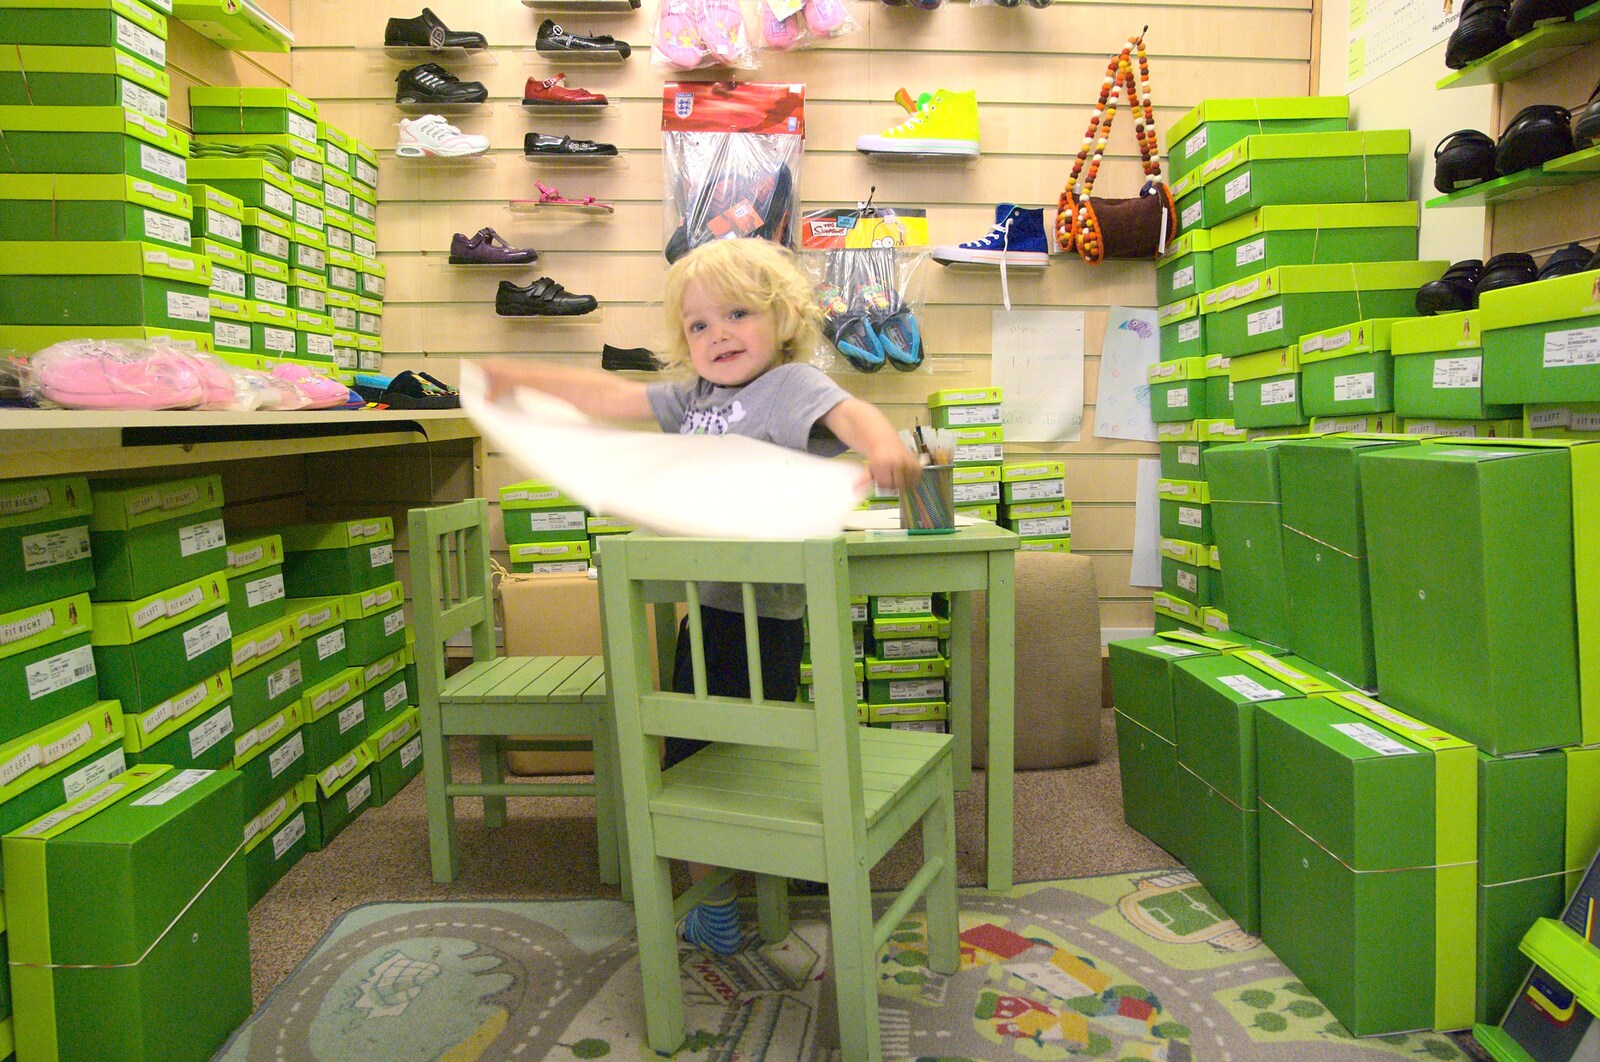 Fred in a shoe shop in Diss from Paella and Roadworks, Brome, Suffolk - 9th July 2011